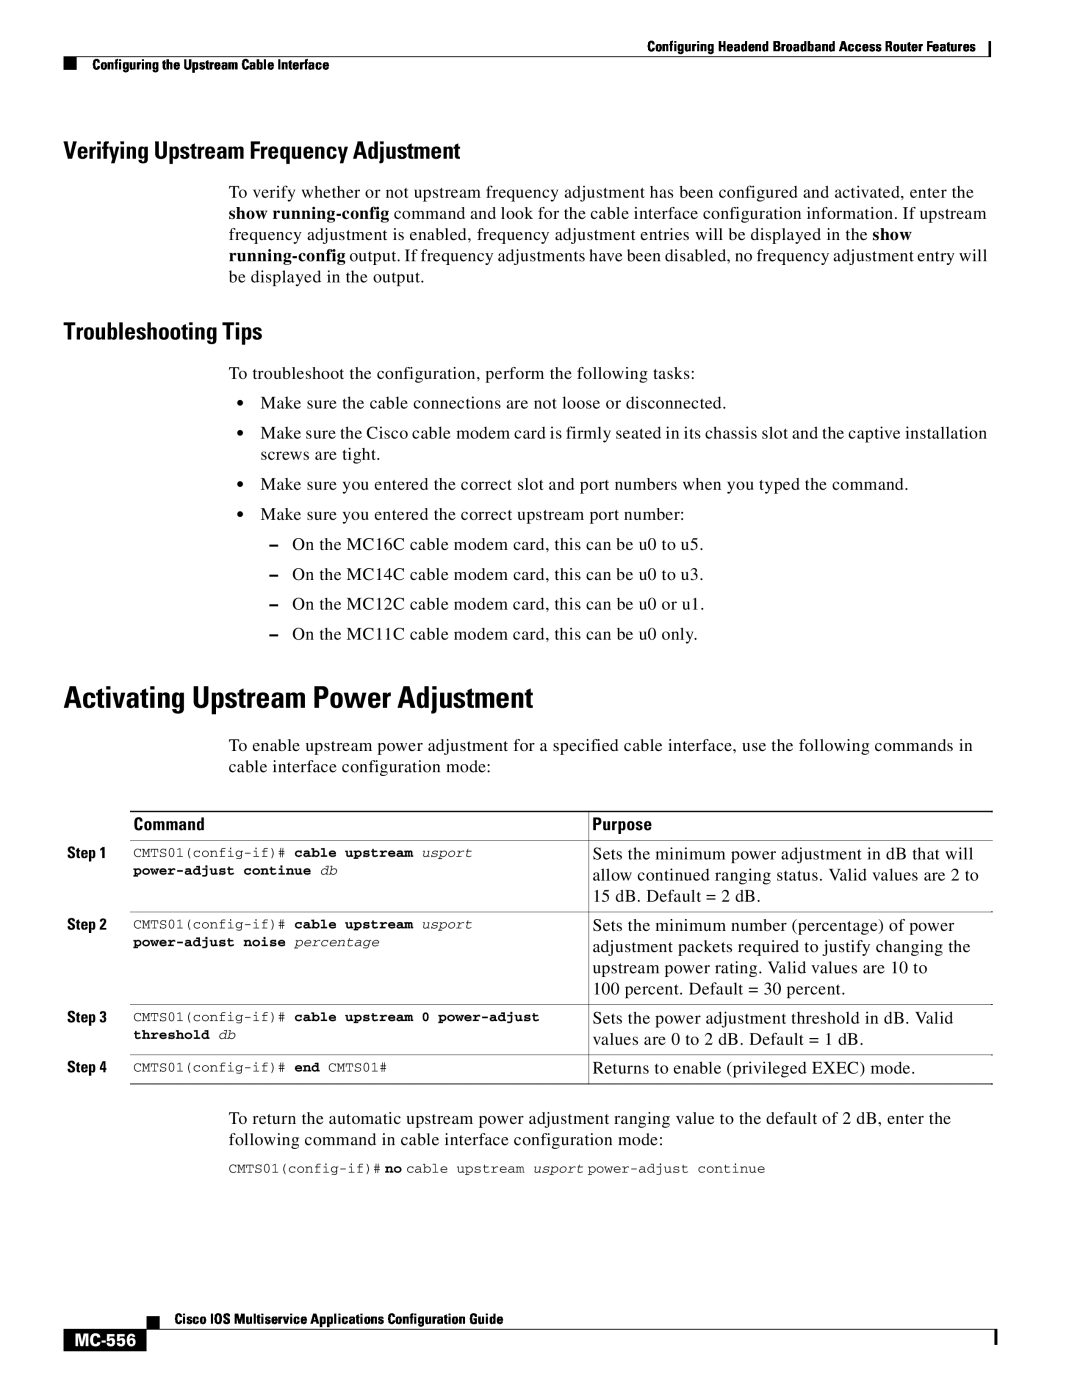 Cisco Systems uBR7200 manual Activating Upstream Power Adjustment, Verifying Upstream Frequency Adjustment, MC-556, Command 